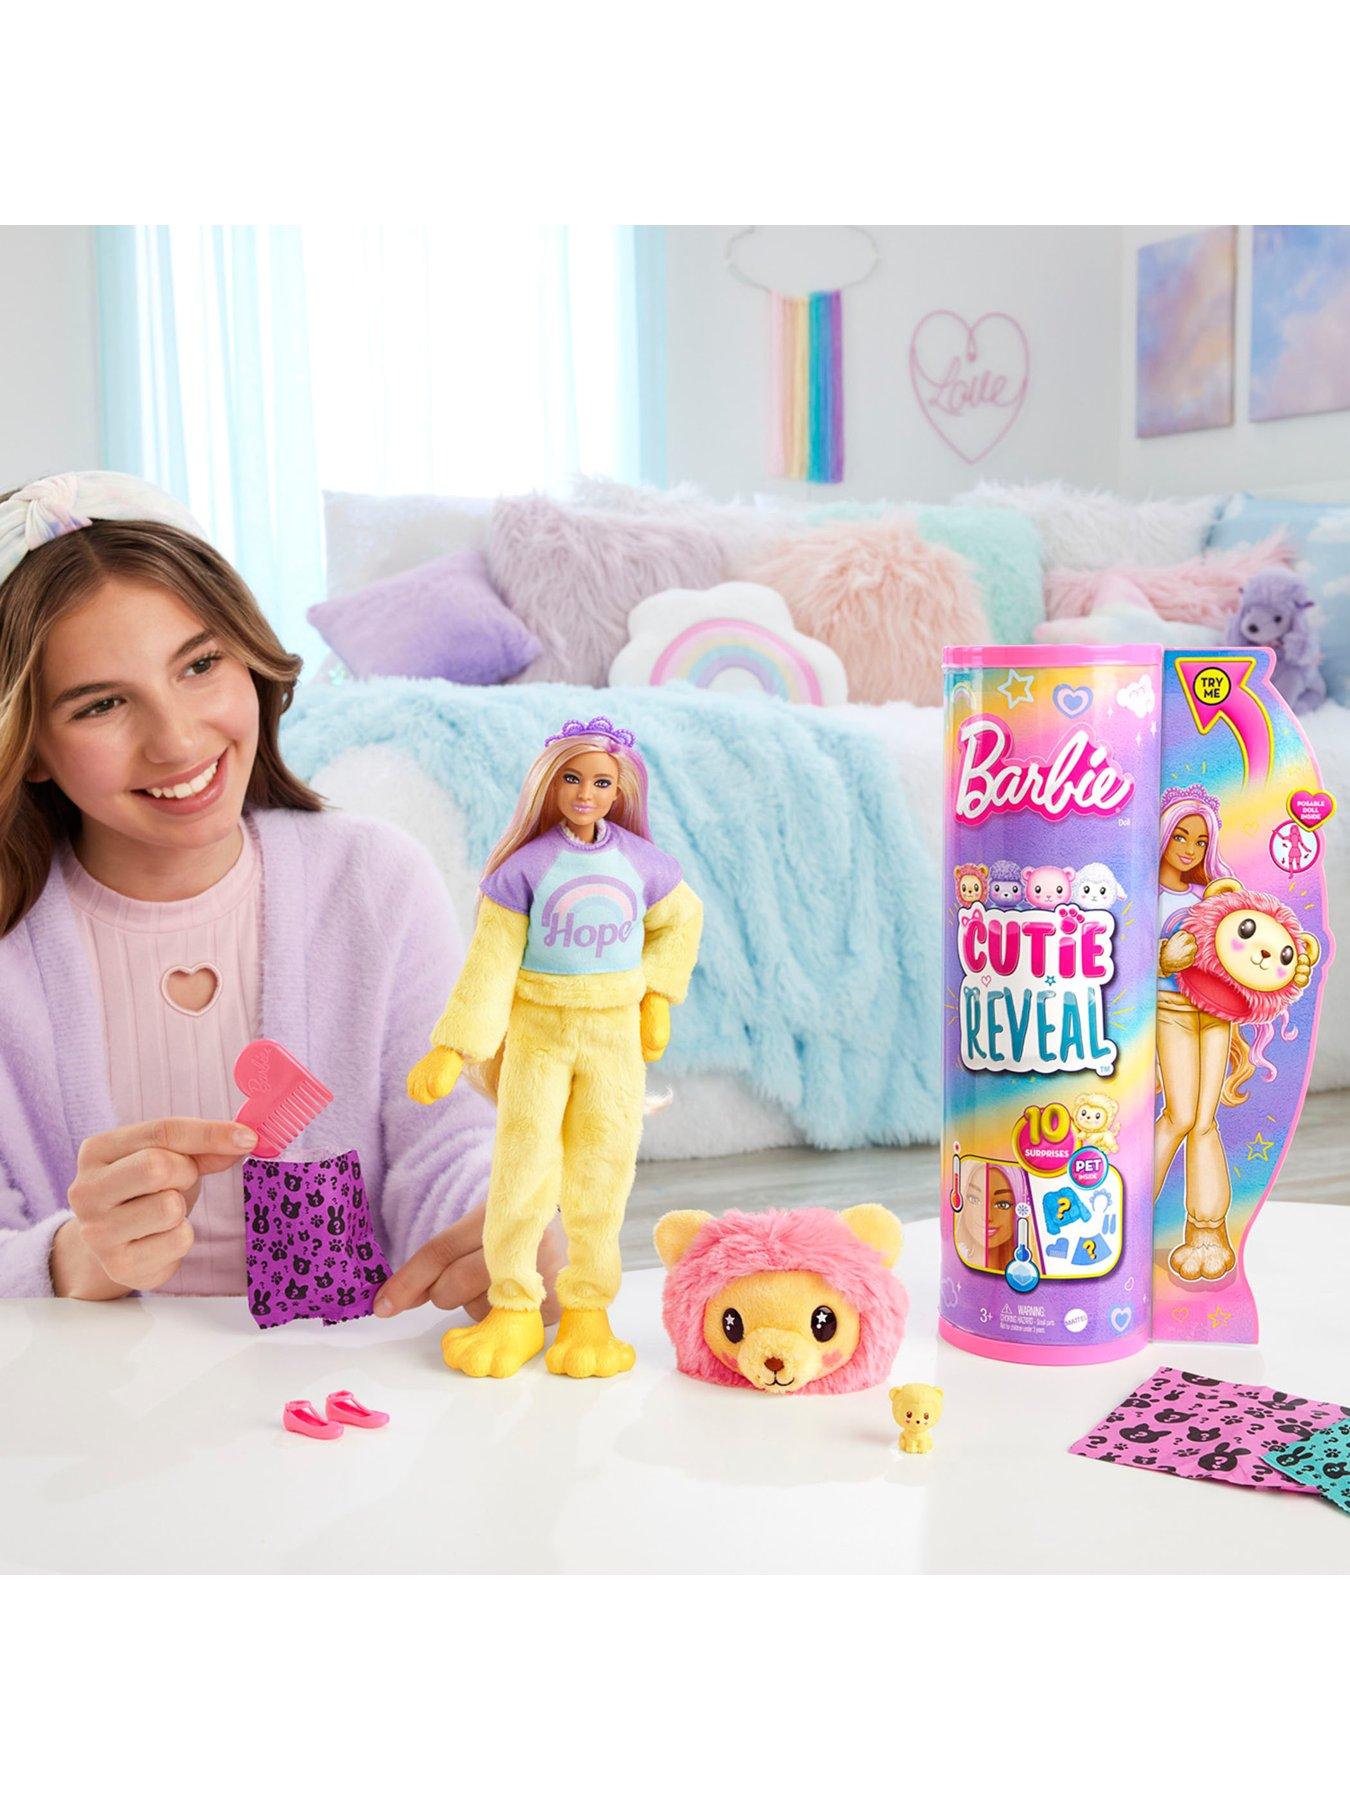 Barbie Cutie Reveal NEW Cozy Cute Tee Series But Are the Shirts Removable?  